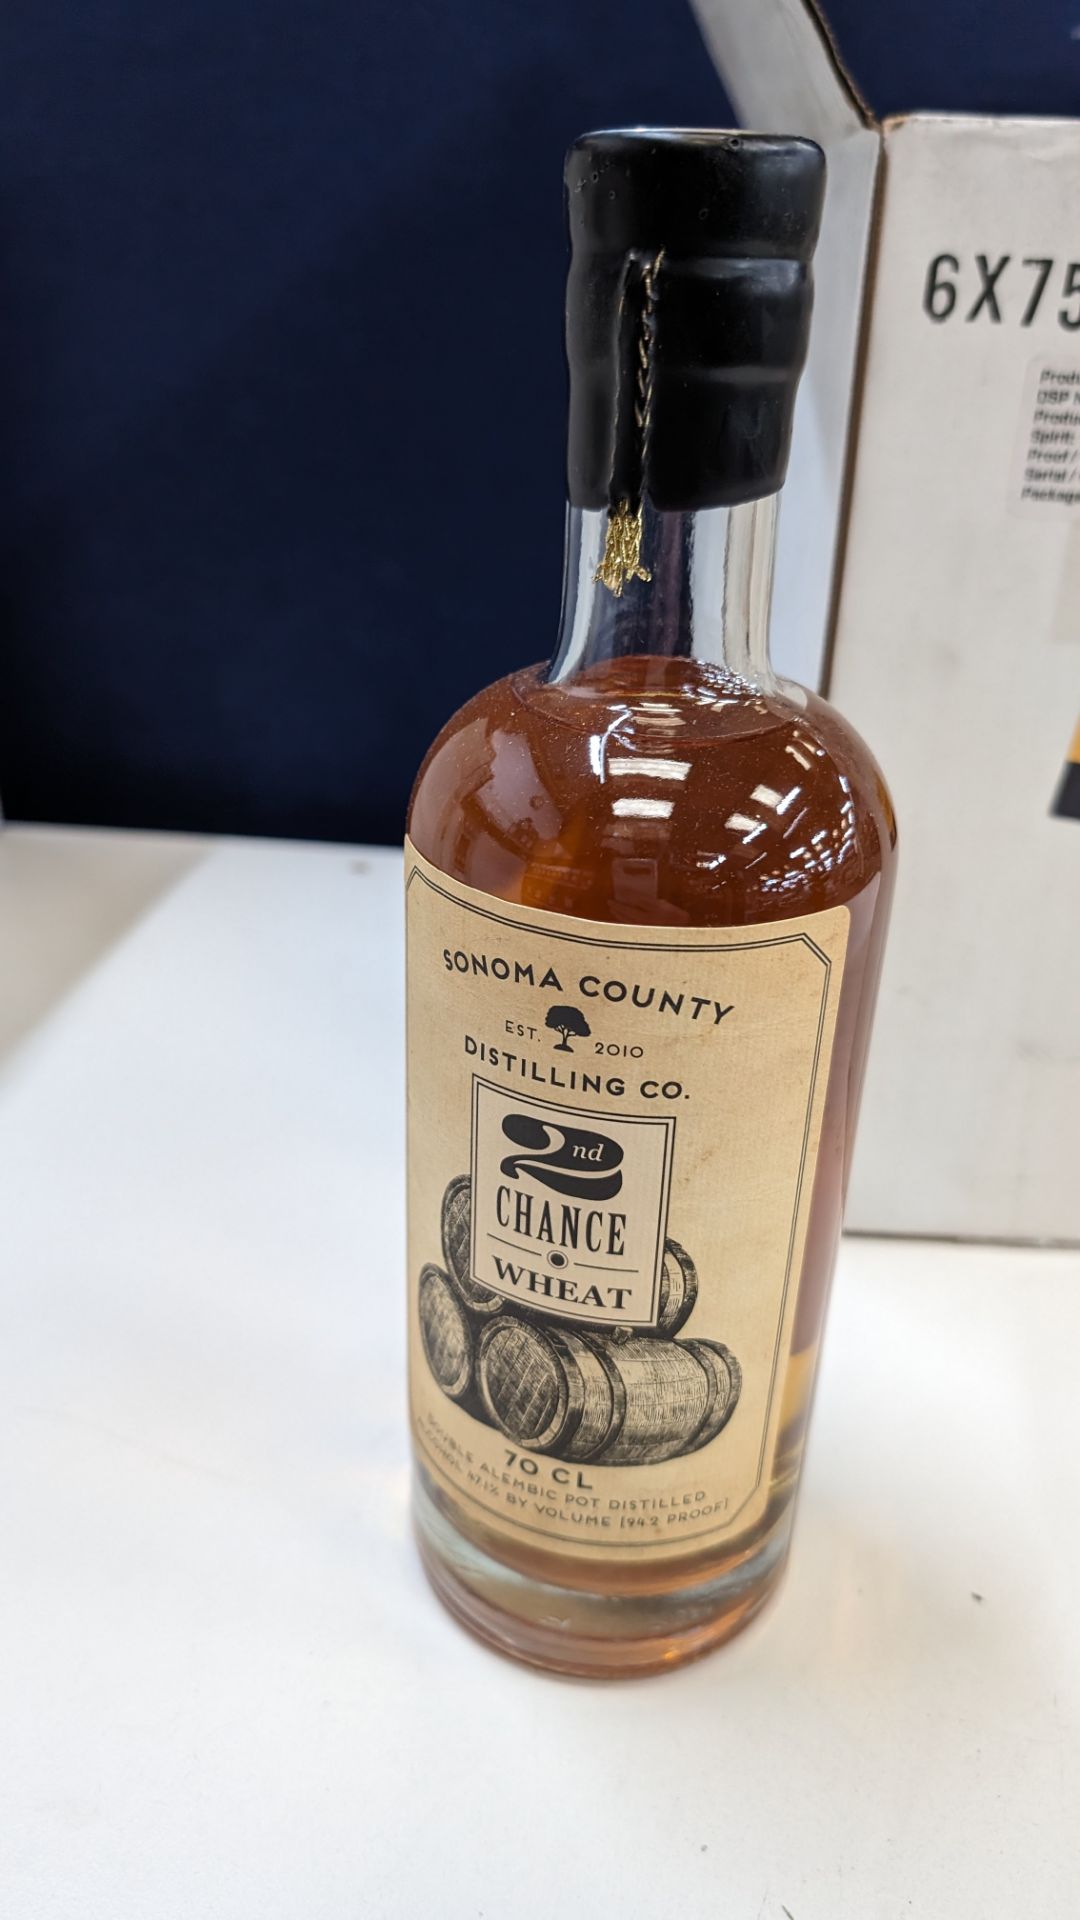 6 off 700ml bottles of Sonoma County 2nd Chance Wheat Double Alembic Pot Distilled Whiskey. In white - Bild 4 aus 9